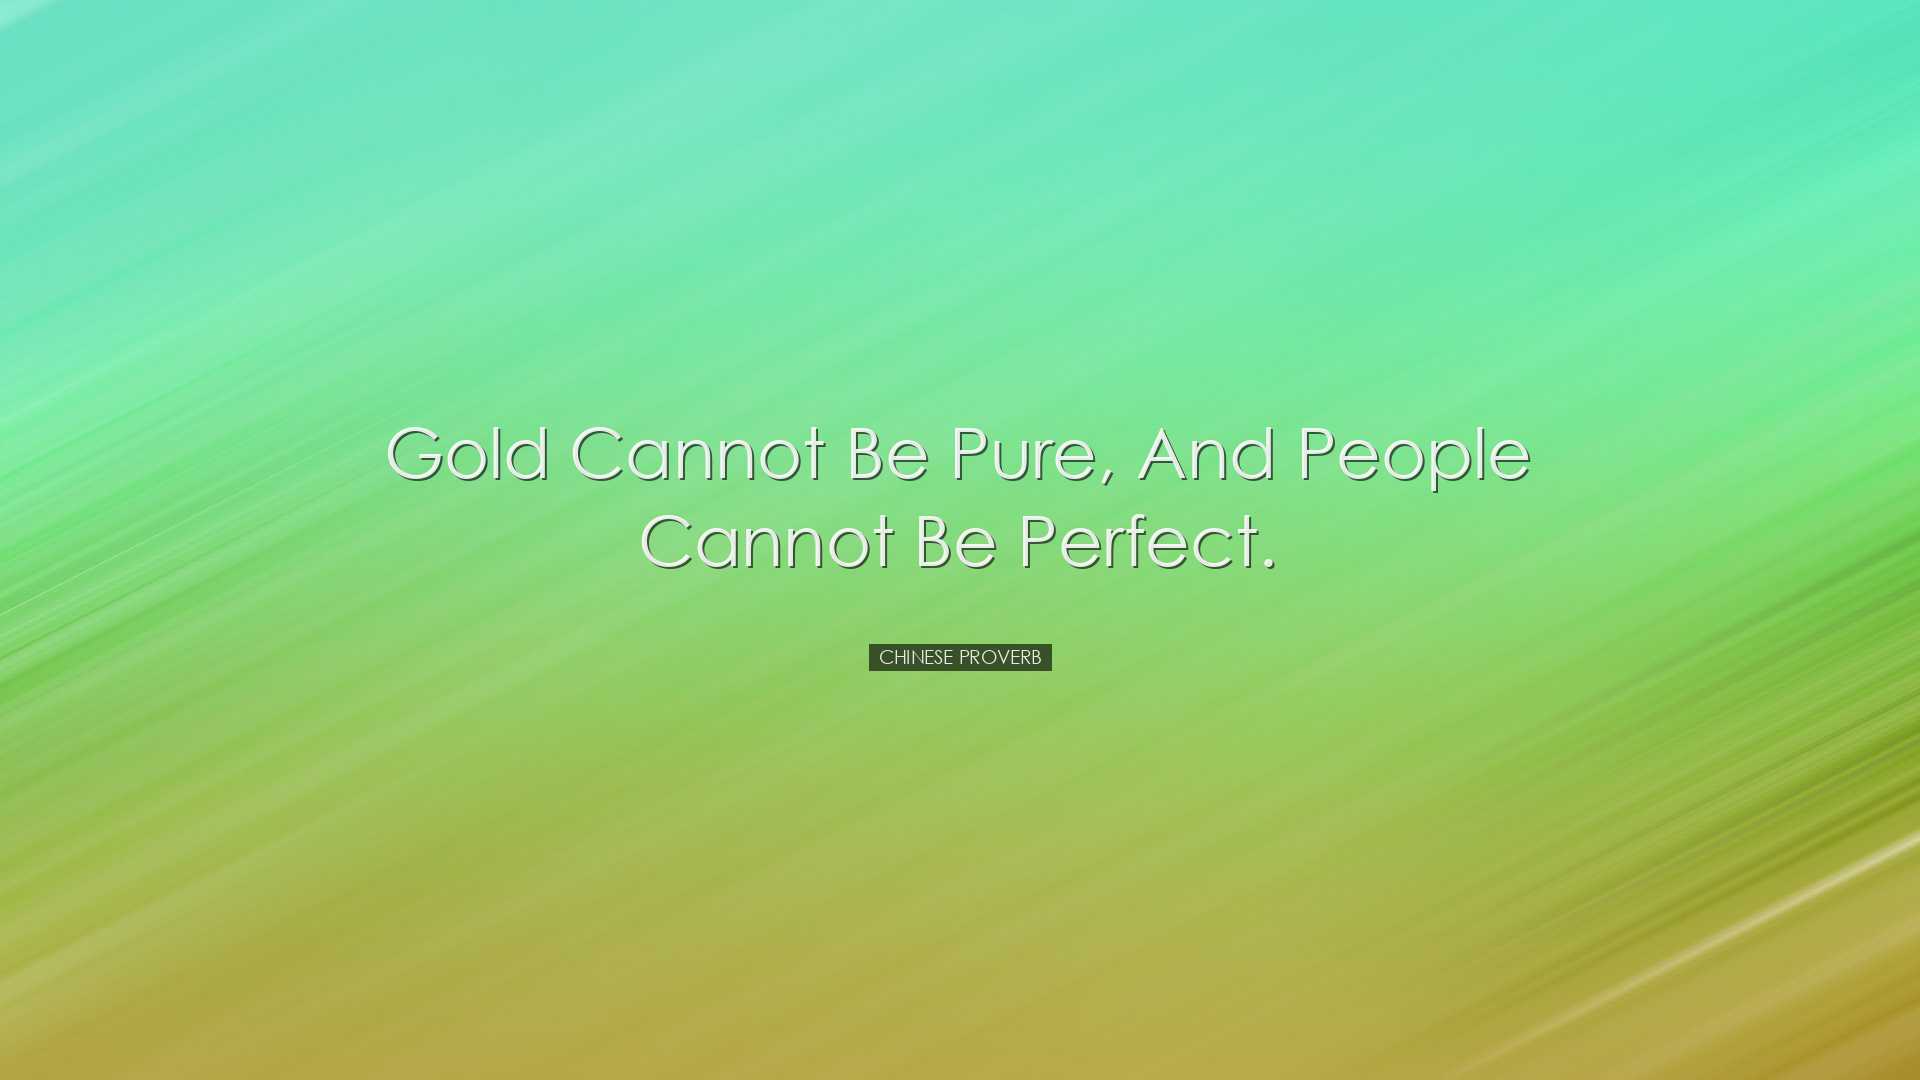 Gold cannot be pure, and people cannot be perfect. - Chinese Prove